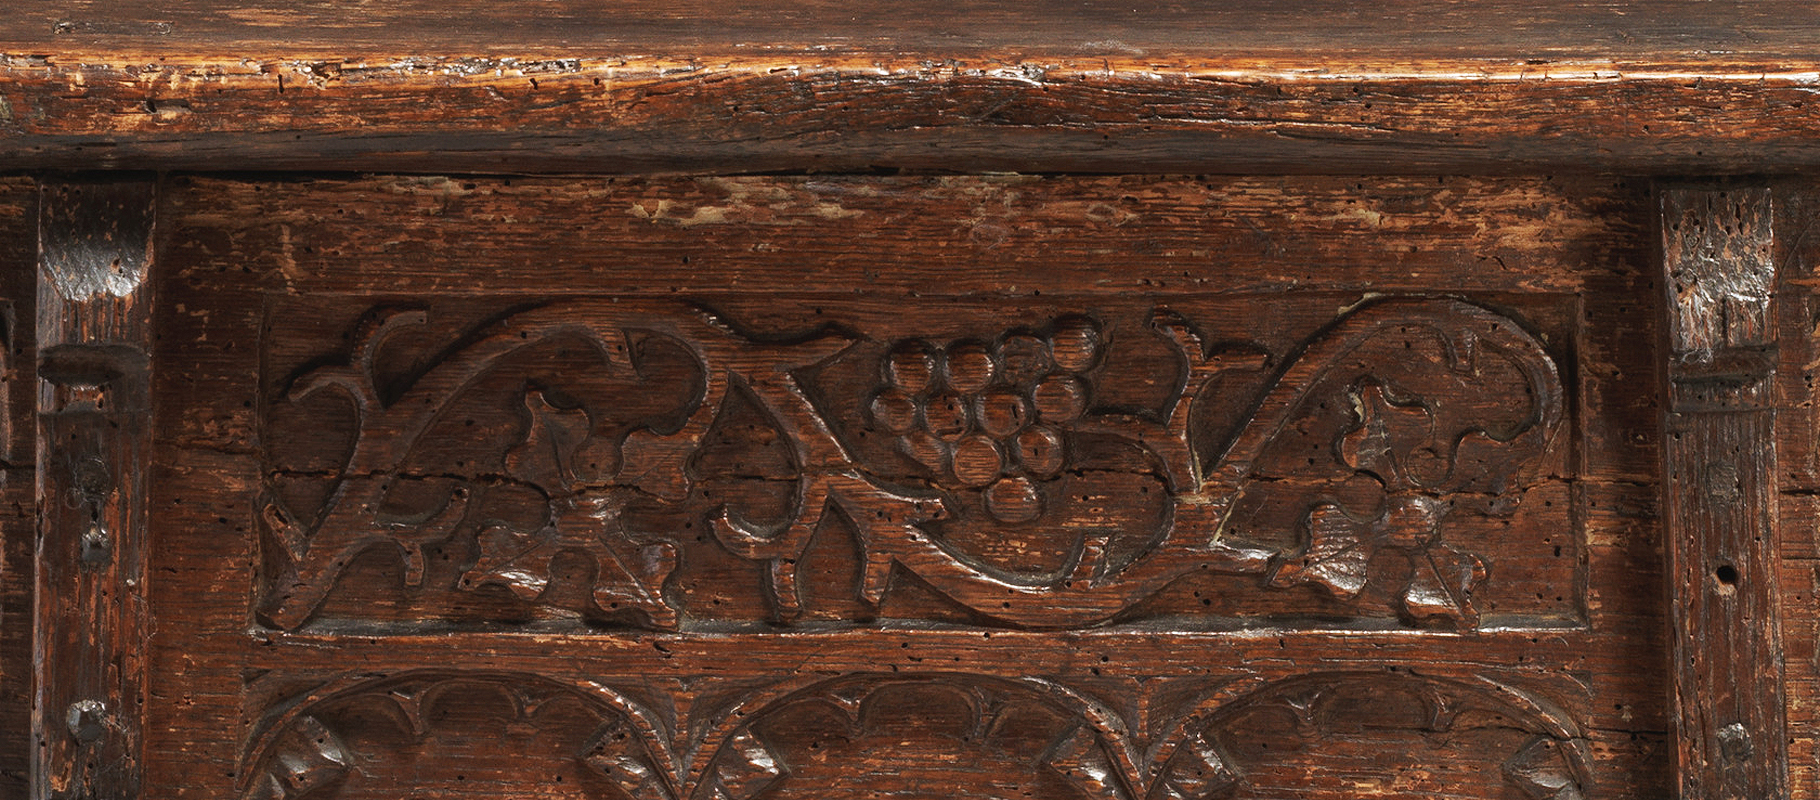 16th century stool carving